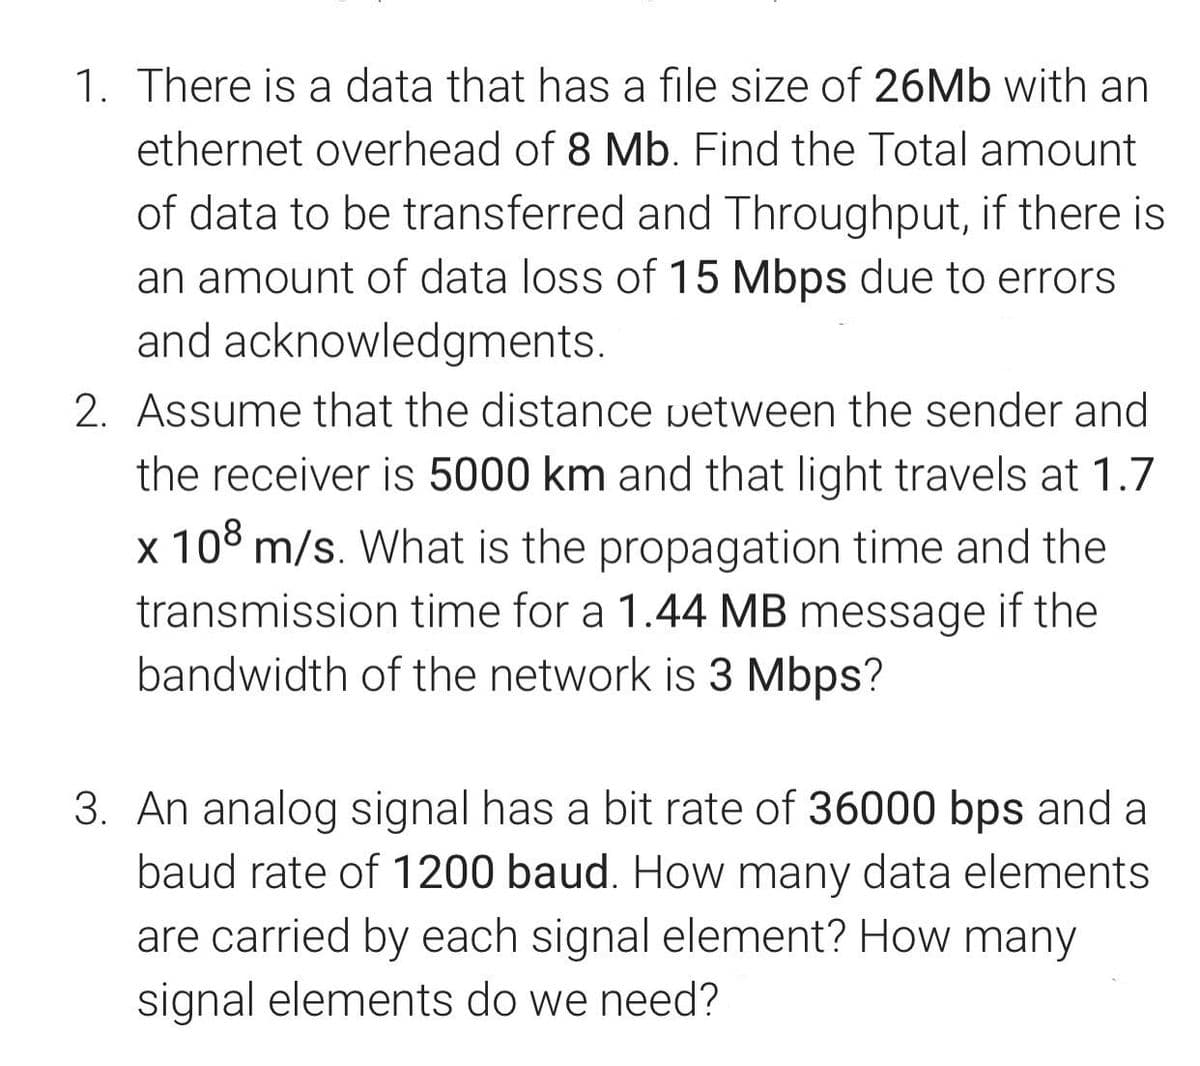 1. There is a data that has a file size of 26MB with an
ethernet overhead of 8 Mb. Find the Total amount
of data to be transferred and Throughput, if there is
an amount of data loss of 15 Mbps due to errors
and acknowledgments.
2. Assume that the distance vetween the sender and
the receiver is 5000 km and that light travels at 1.7
x 108 m/s. What is the propagation time and the
transmission time for a 1.44 MB message if the
bandwidth of the network is 3 Mbps?
3. An analog signal has a bit rate of 36000 bps and a
baud rate of 1200 baud. How many data elements
are carried by each signal element? How many
signal elements do we need?
